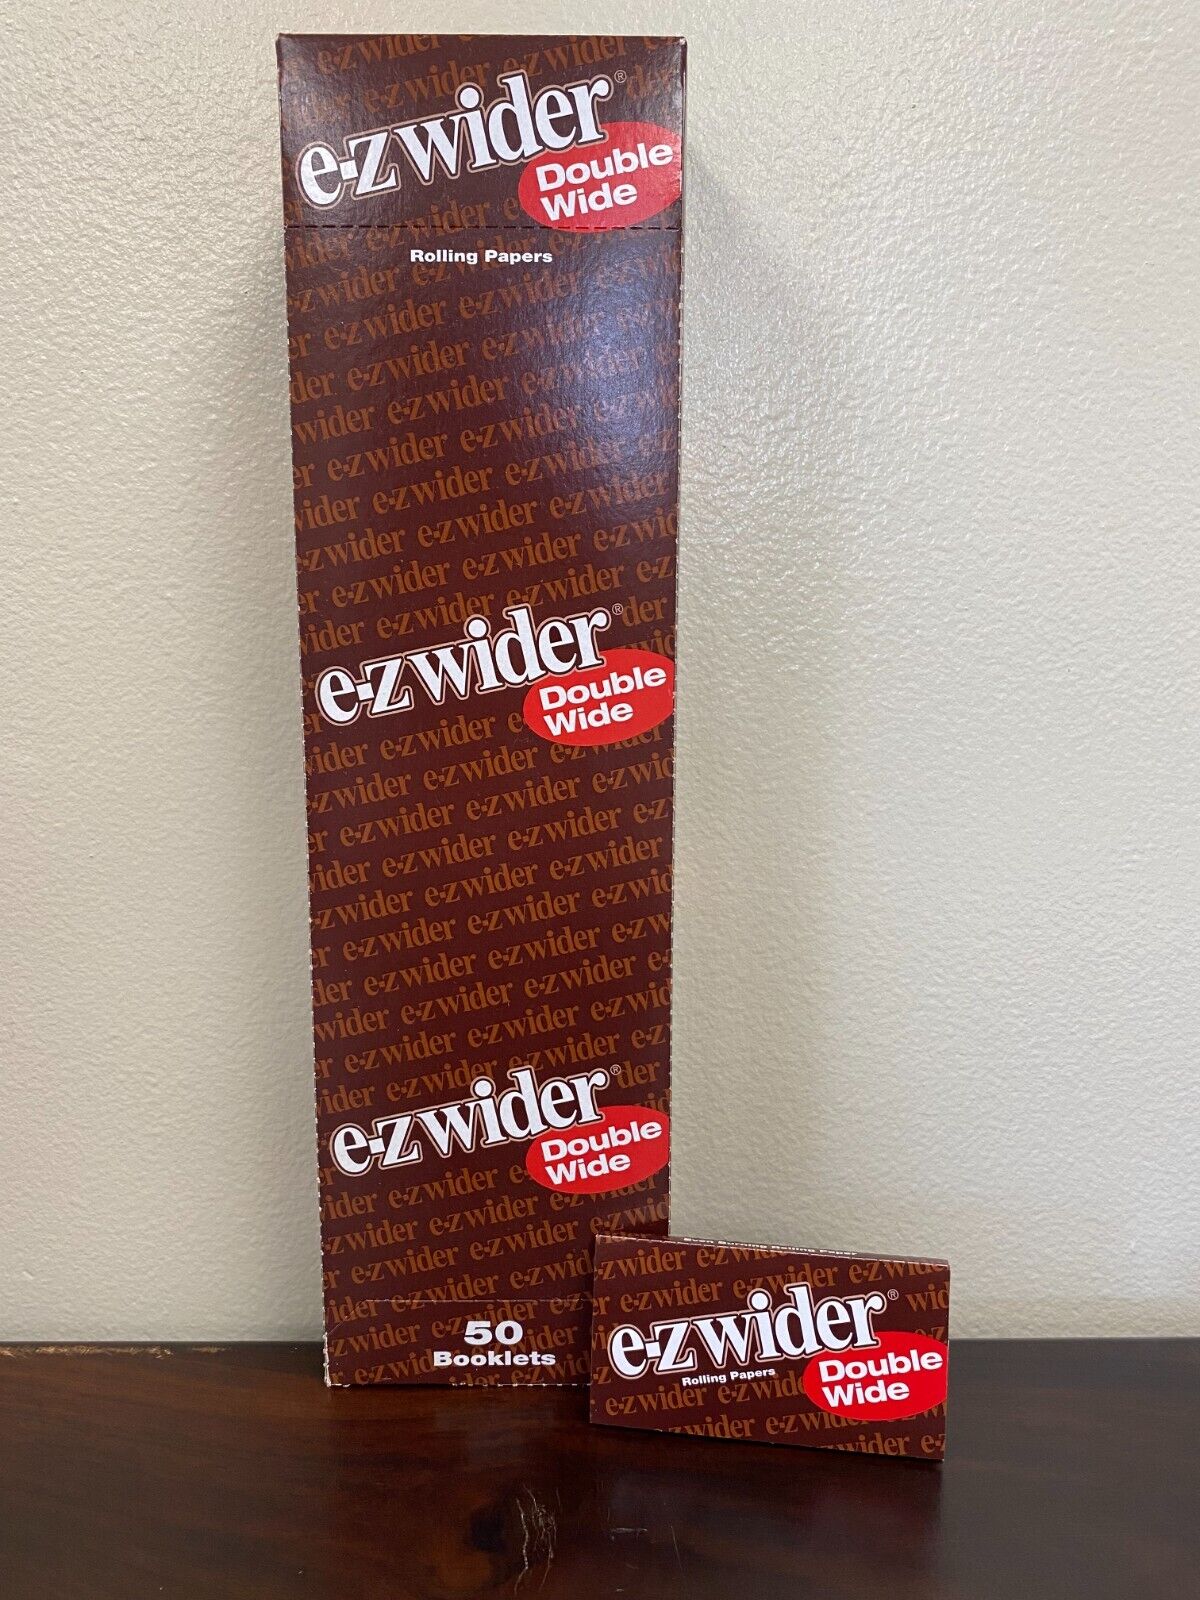 ez Wider Double Wide Cigarette Rolling Papers 50 Booklets Sealed Box